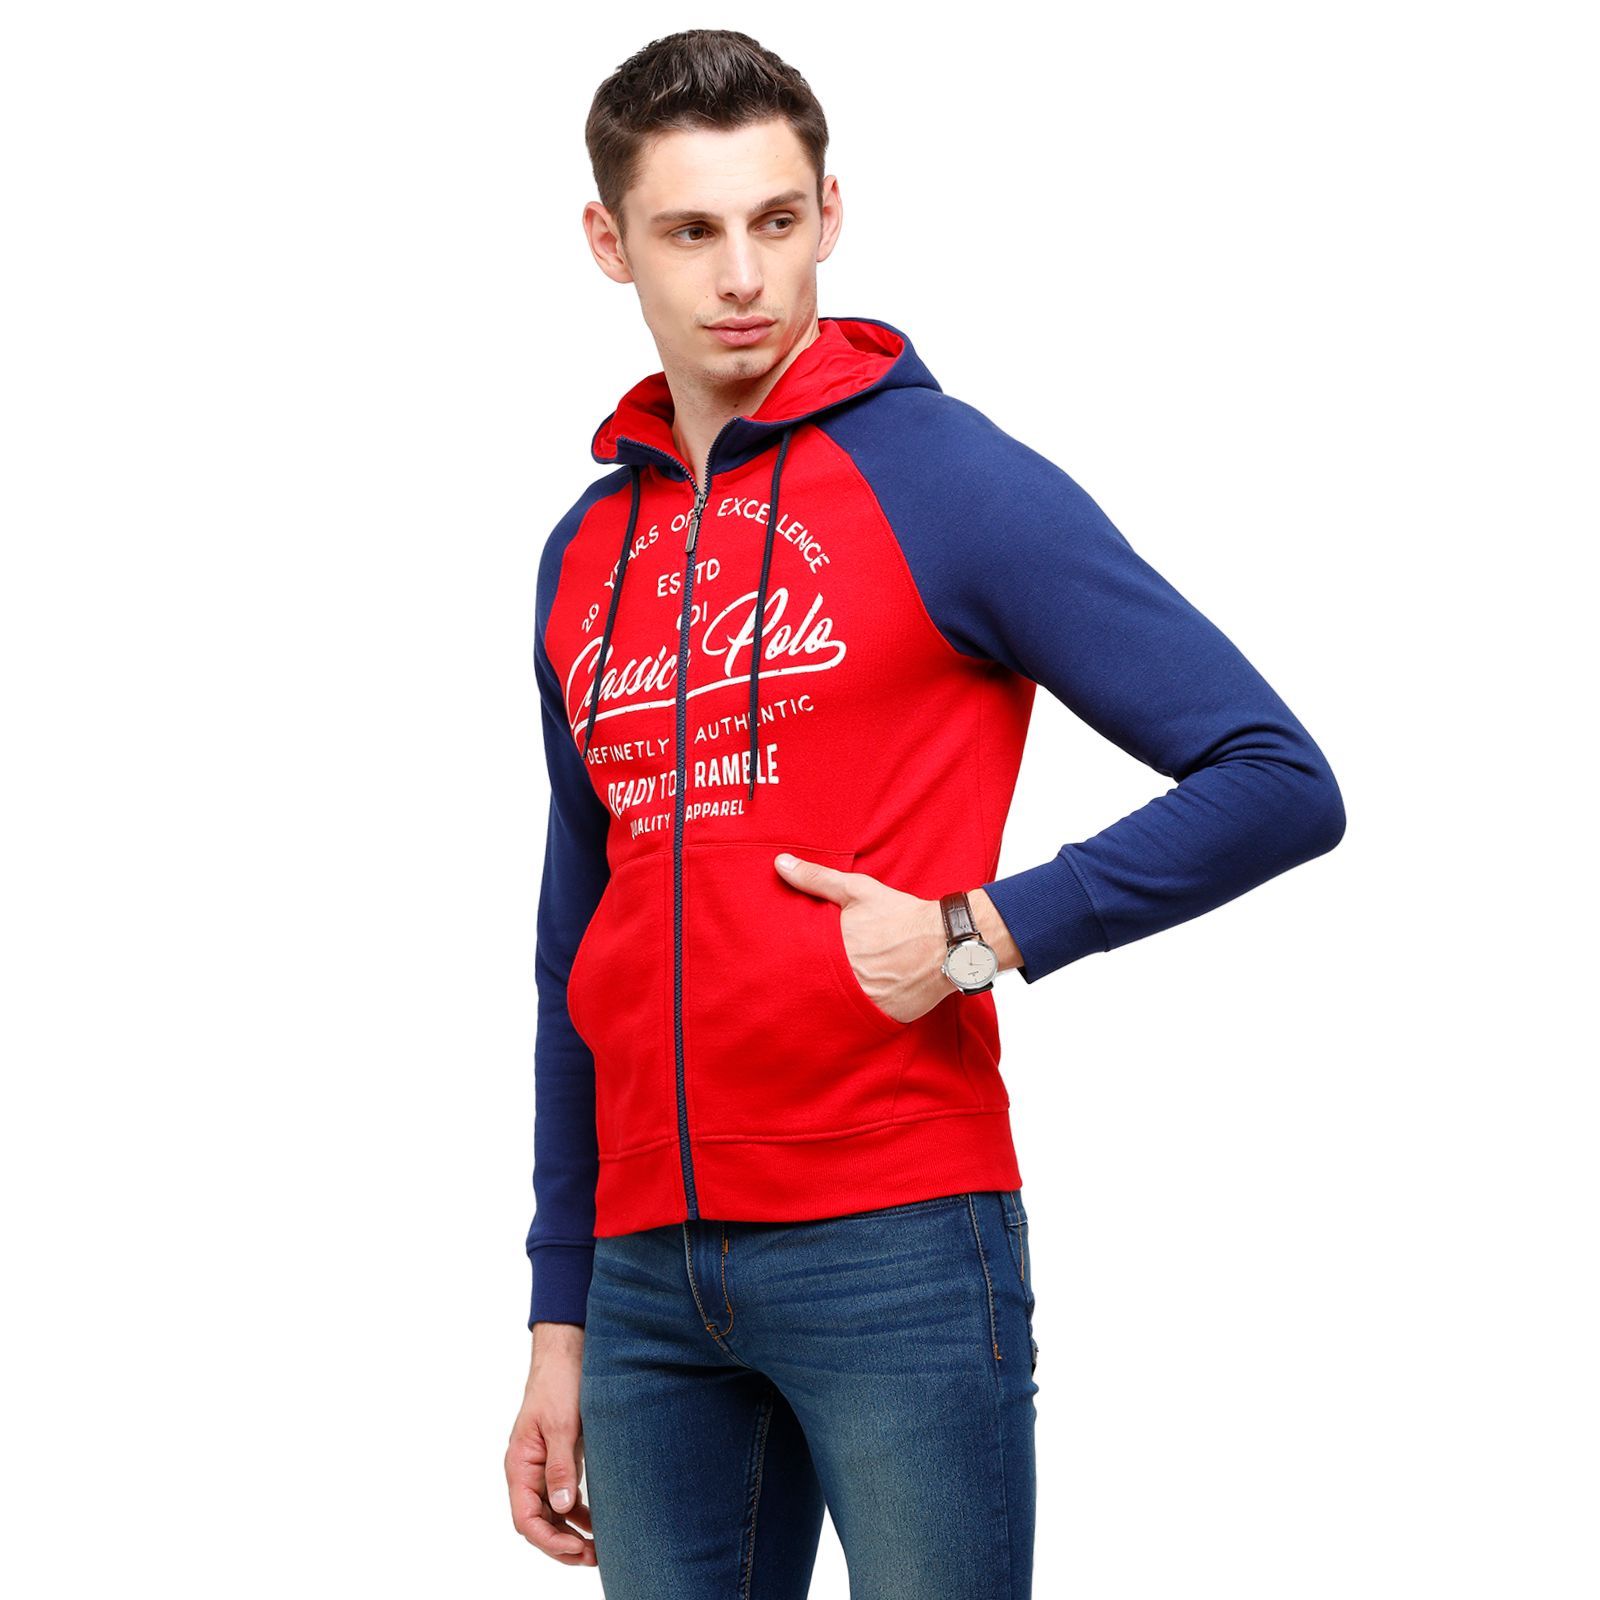 Classic Polo Men's Printed Full Sleeve Red & Blue Hood Sweat Shirt - CPSS-327A Sweat Shirts Classic Polo 